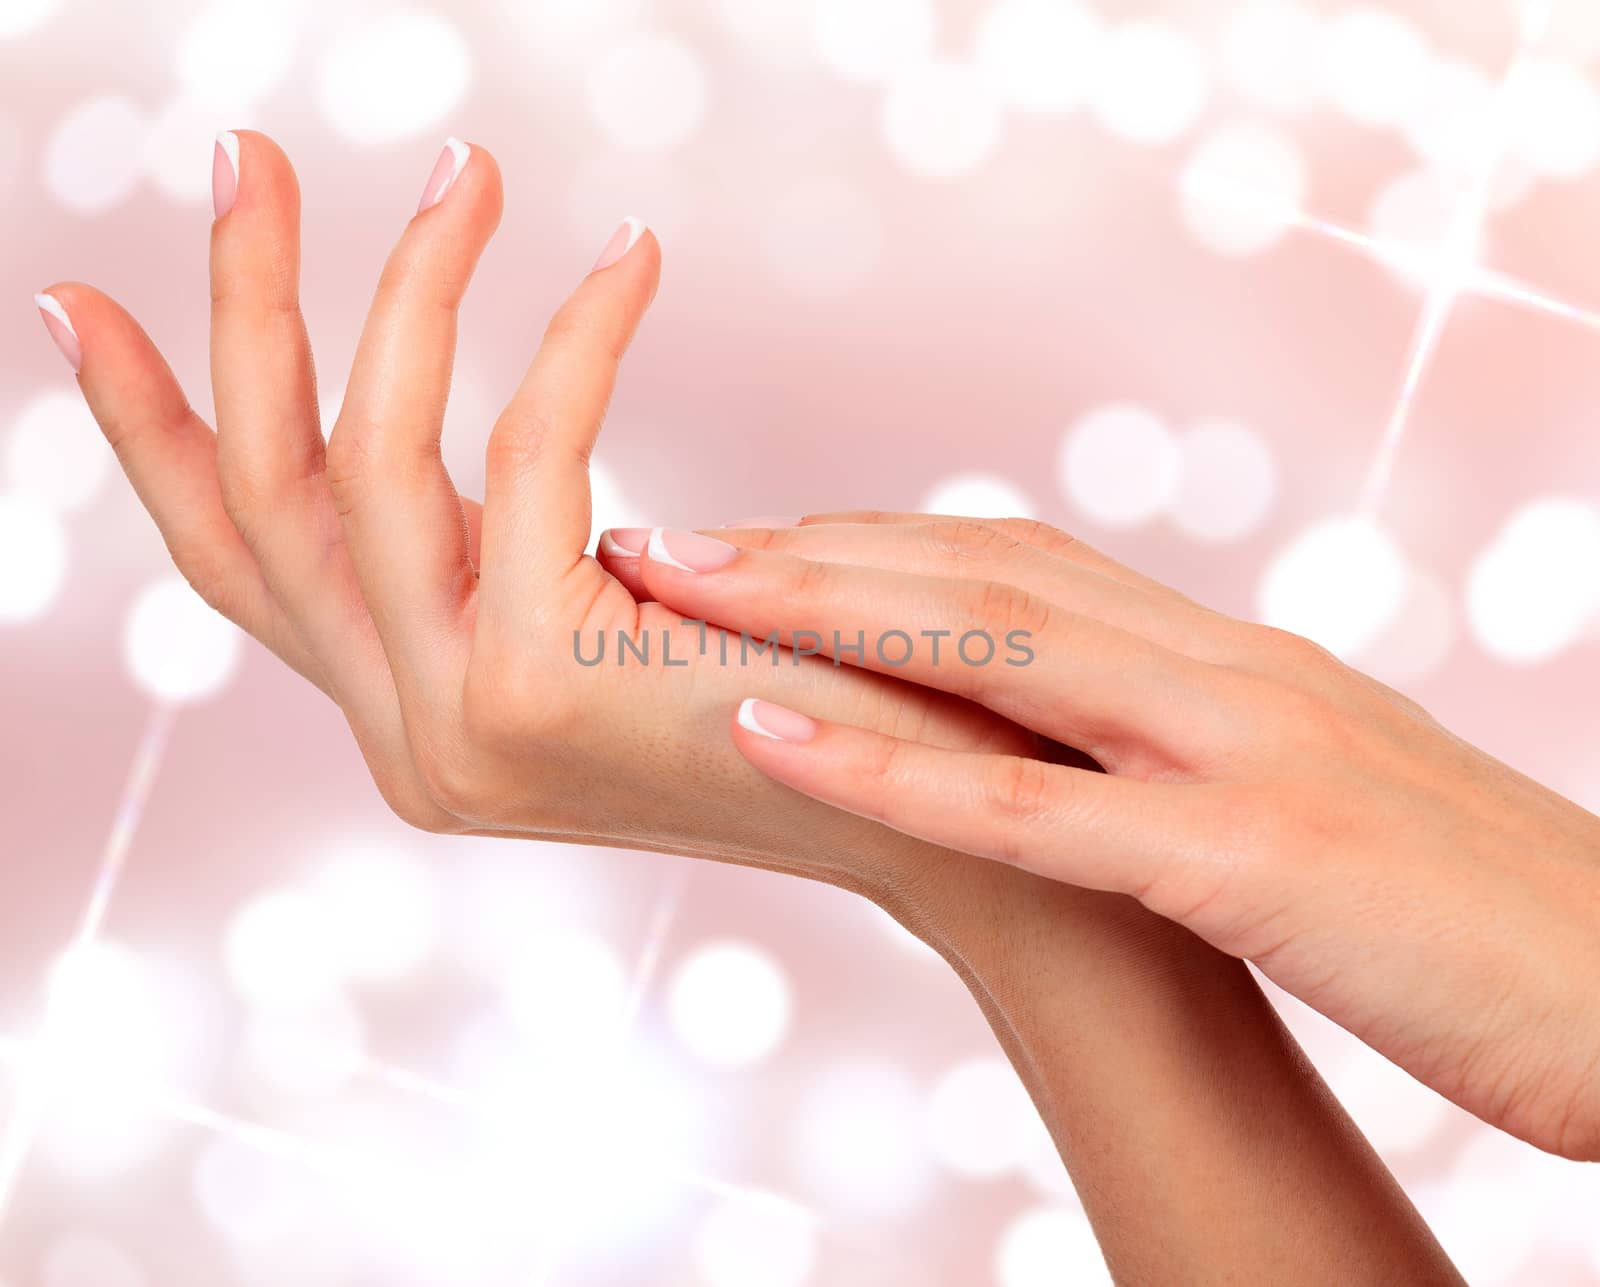 Beautiful woman hands against an abstract background by Nobilior